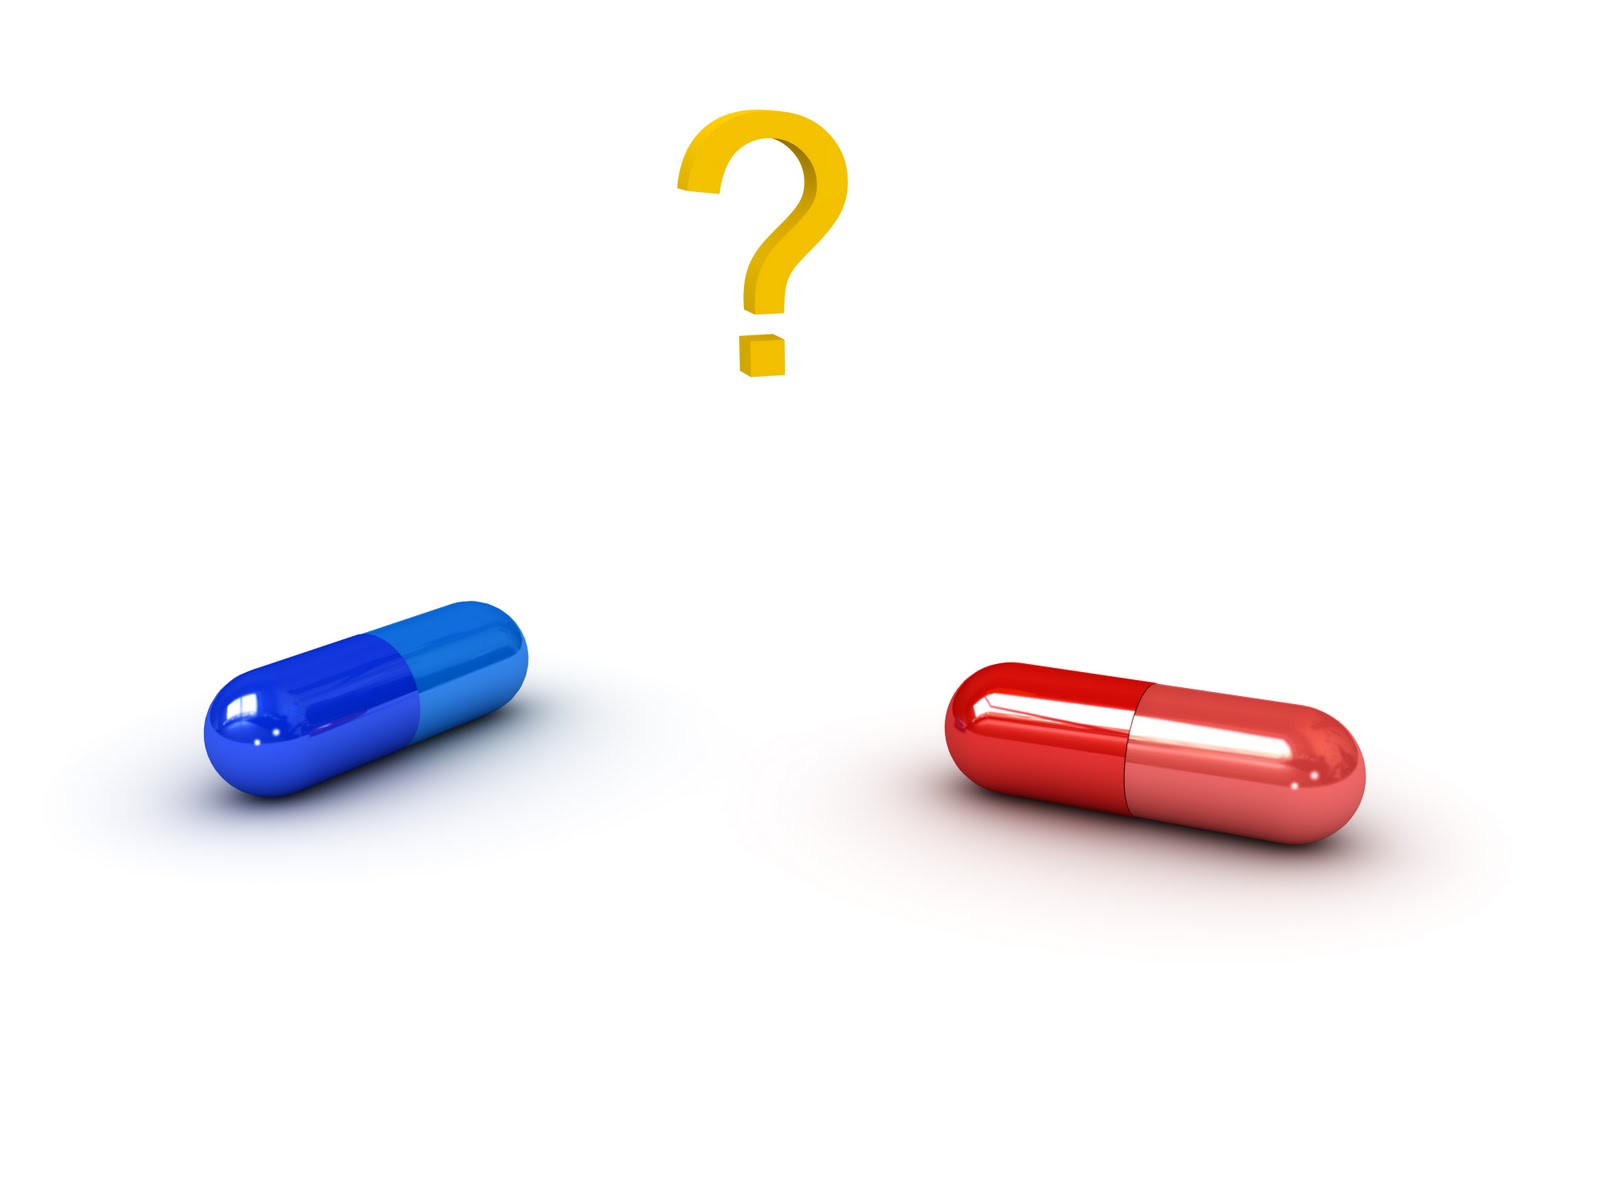 You choose - the red pill or the blue pill? 